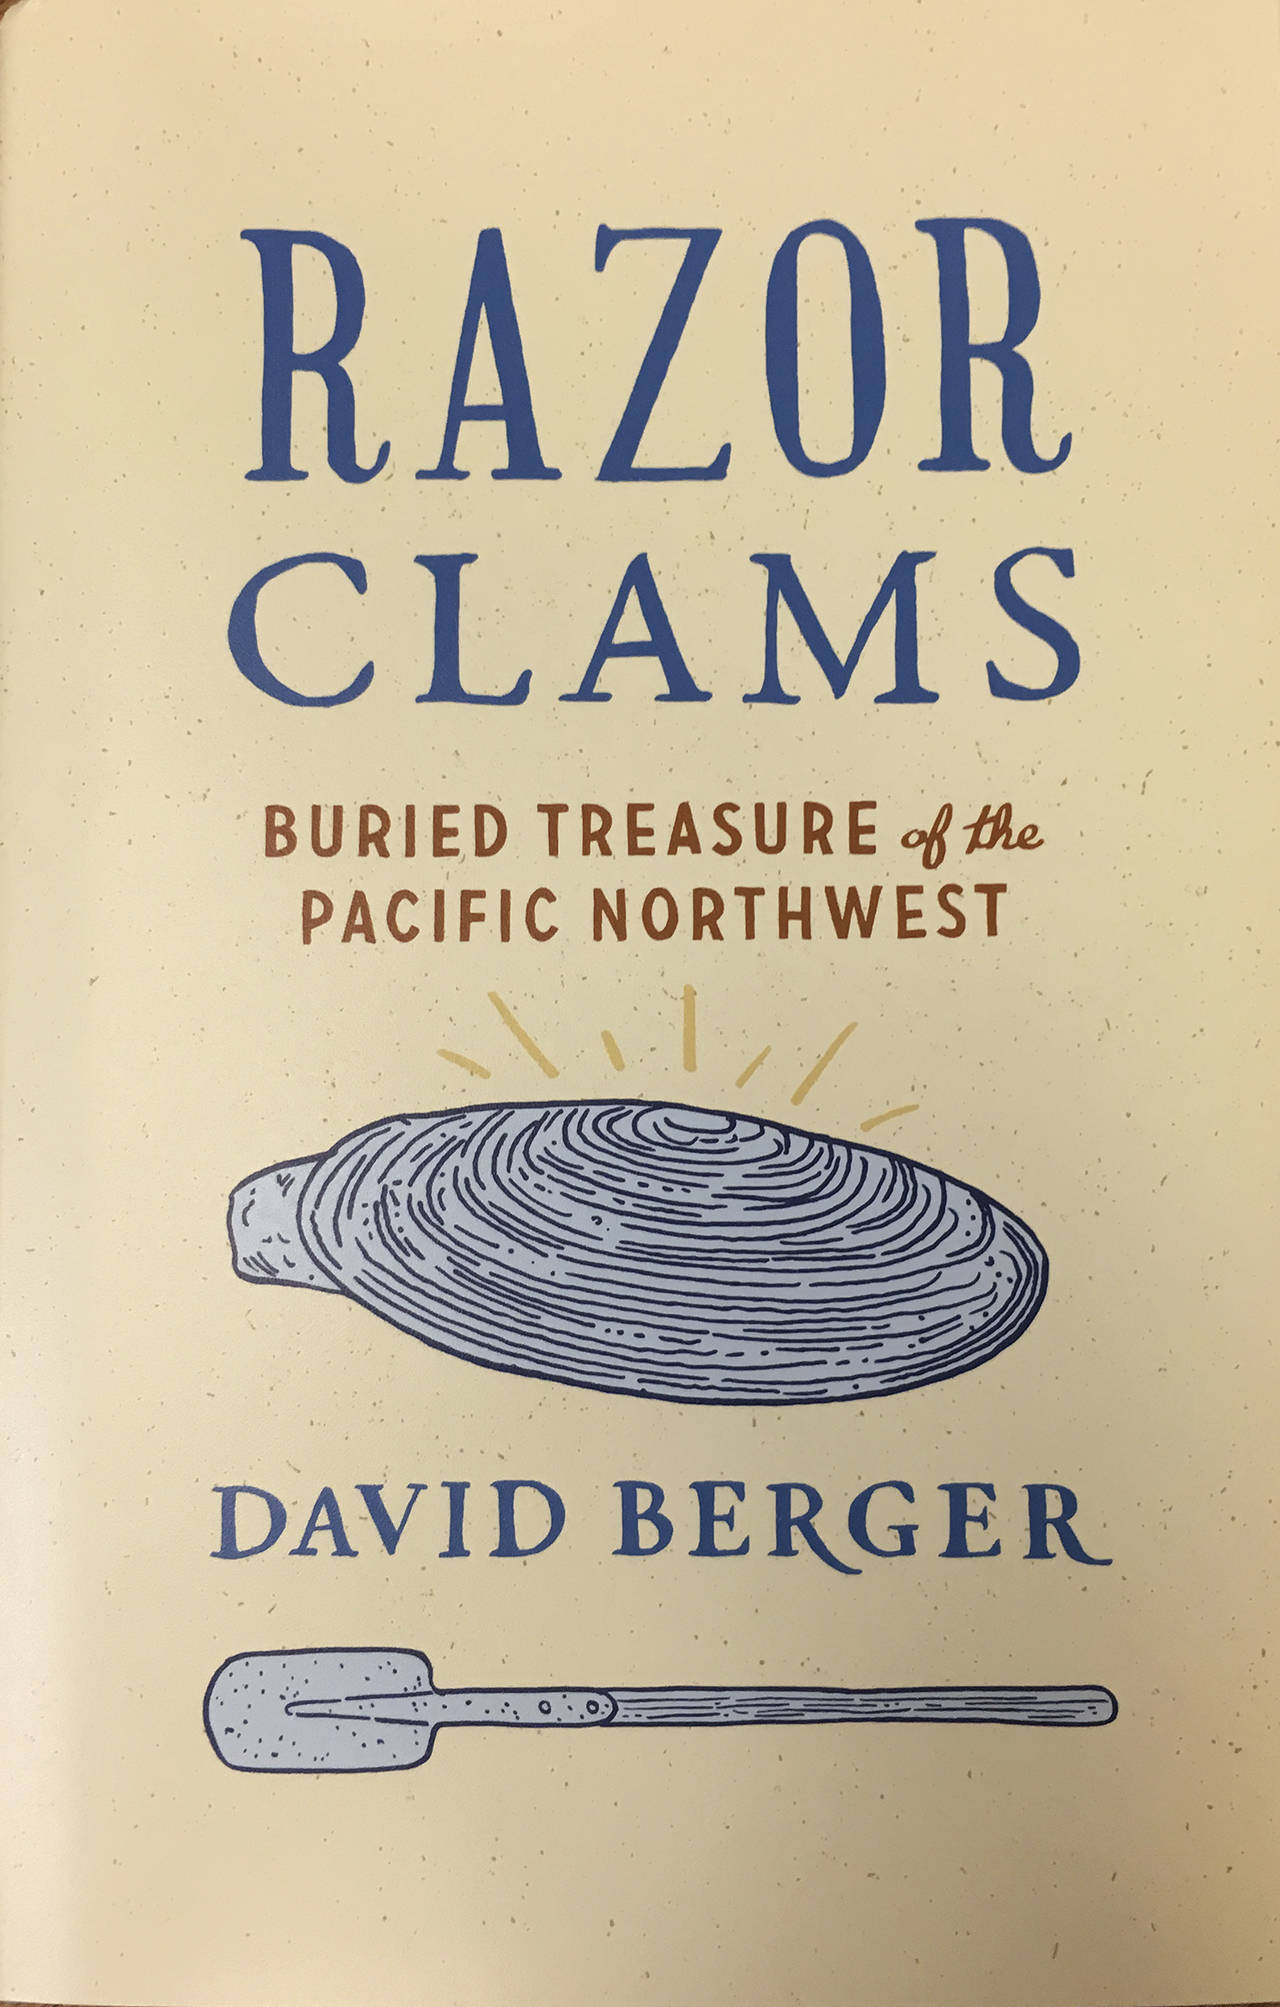 David Berger will speak at two Harbor libraries Saturday about his book, “Razor Clams: Buried Treasure of the Pacific Northwest.”